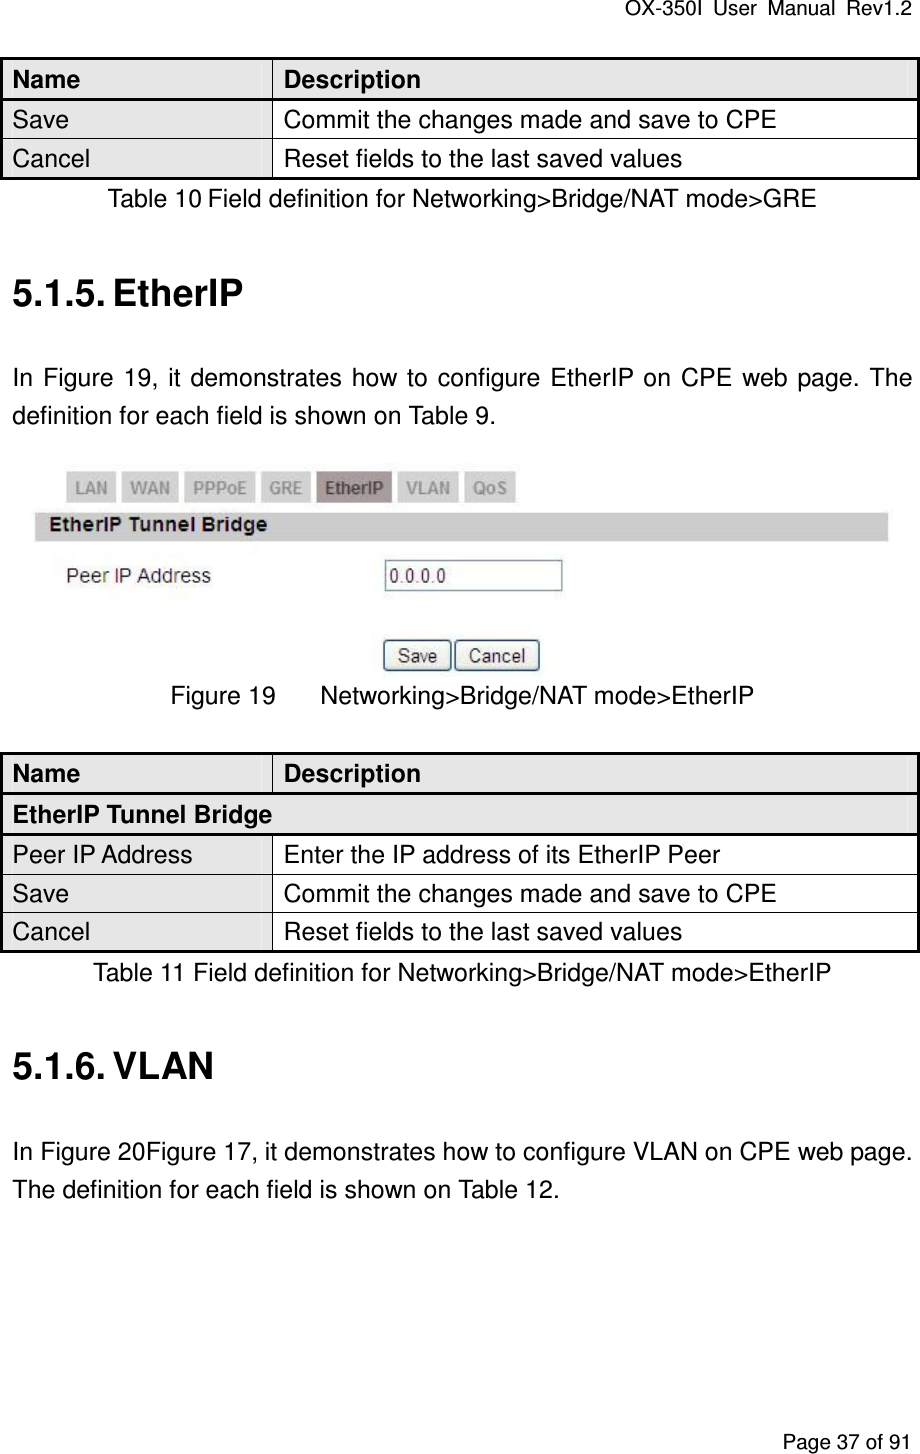 OX-350I  User  Manual  Rev1.2 Page 37 of 91 Name  Description Save  Commit the changes made and save to CPE Cancel  Reset fields to the last saved values Table 10 Field definition for Networking&gt;Bridge/NAT mode&gt;GRE 5.1.5. EtherIP In  Figure 19,  it demonstrates  how to configure EtherIP on  CPE  web page. The definition for each field is shown on Table 9.  Figure 19  Networking&gt;Bridge/NAT mode&gt;EtherIP Name  Description EtherIP Tunnel Bridge Peer IP Address  Enter the IP address of its EtherIP Peer Save  Commit the changes made and save to CPE Cancel  Reset fields to the last saved values Table 11 Field definition for Networking&gt;Bridge/NAT mode&gt;EtherIP 5.1.6. VLAN In Figure 20Figure 17, it demonstrates how to configure VLAN on CPE web page. The definition for each field is shown on Table 12. 